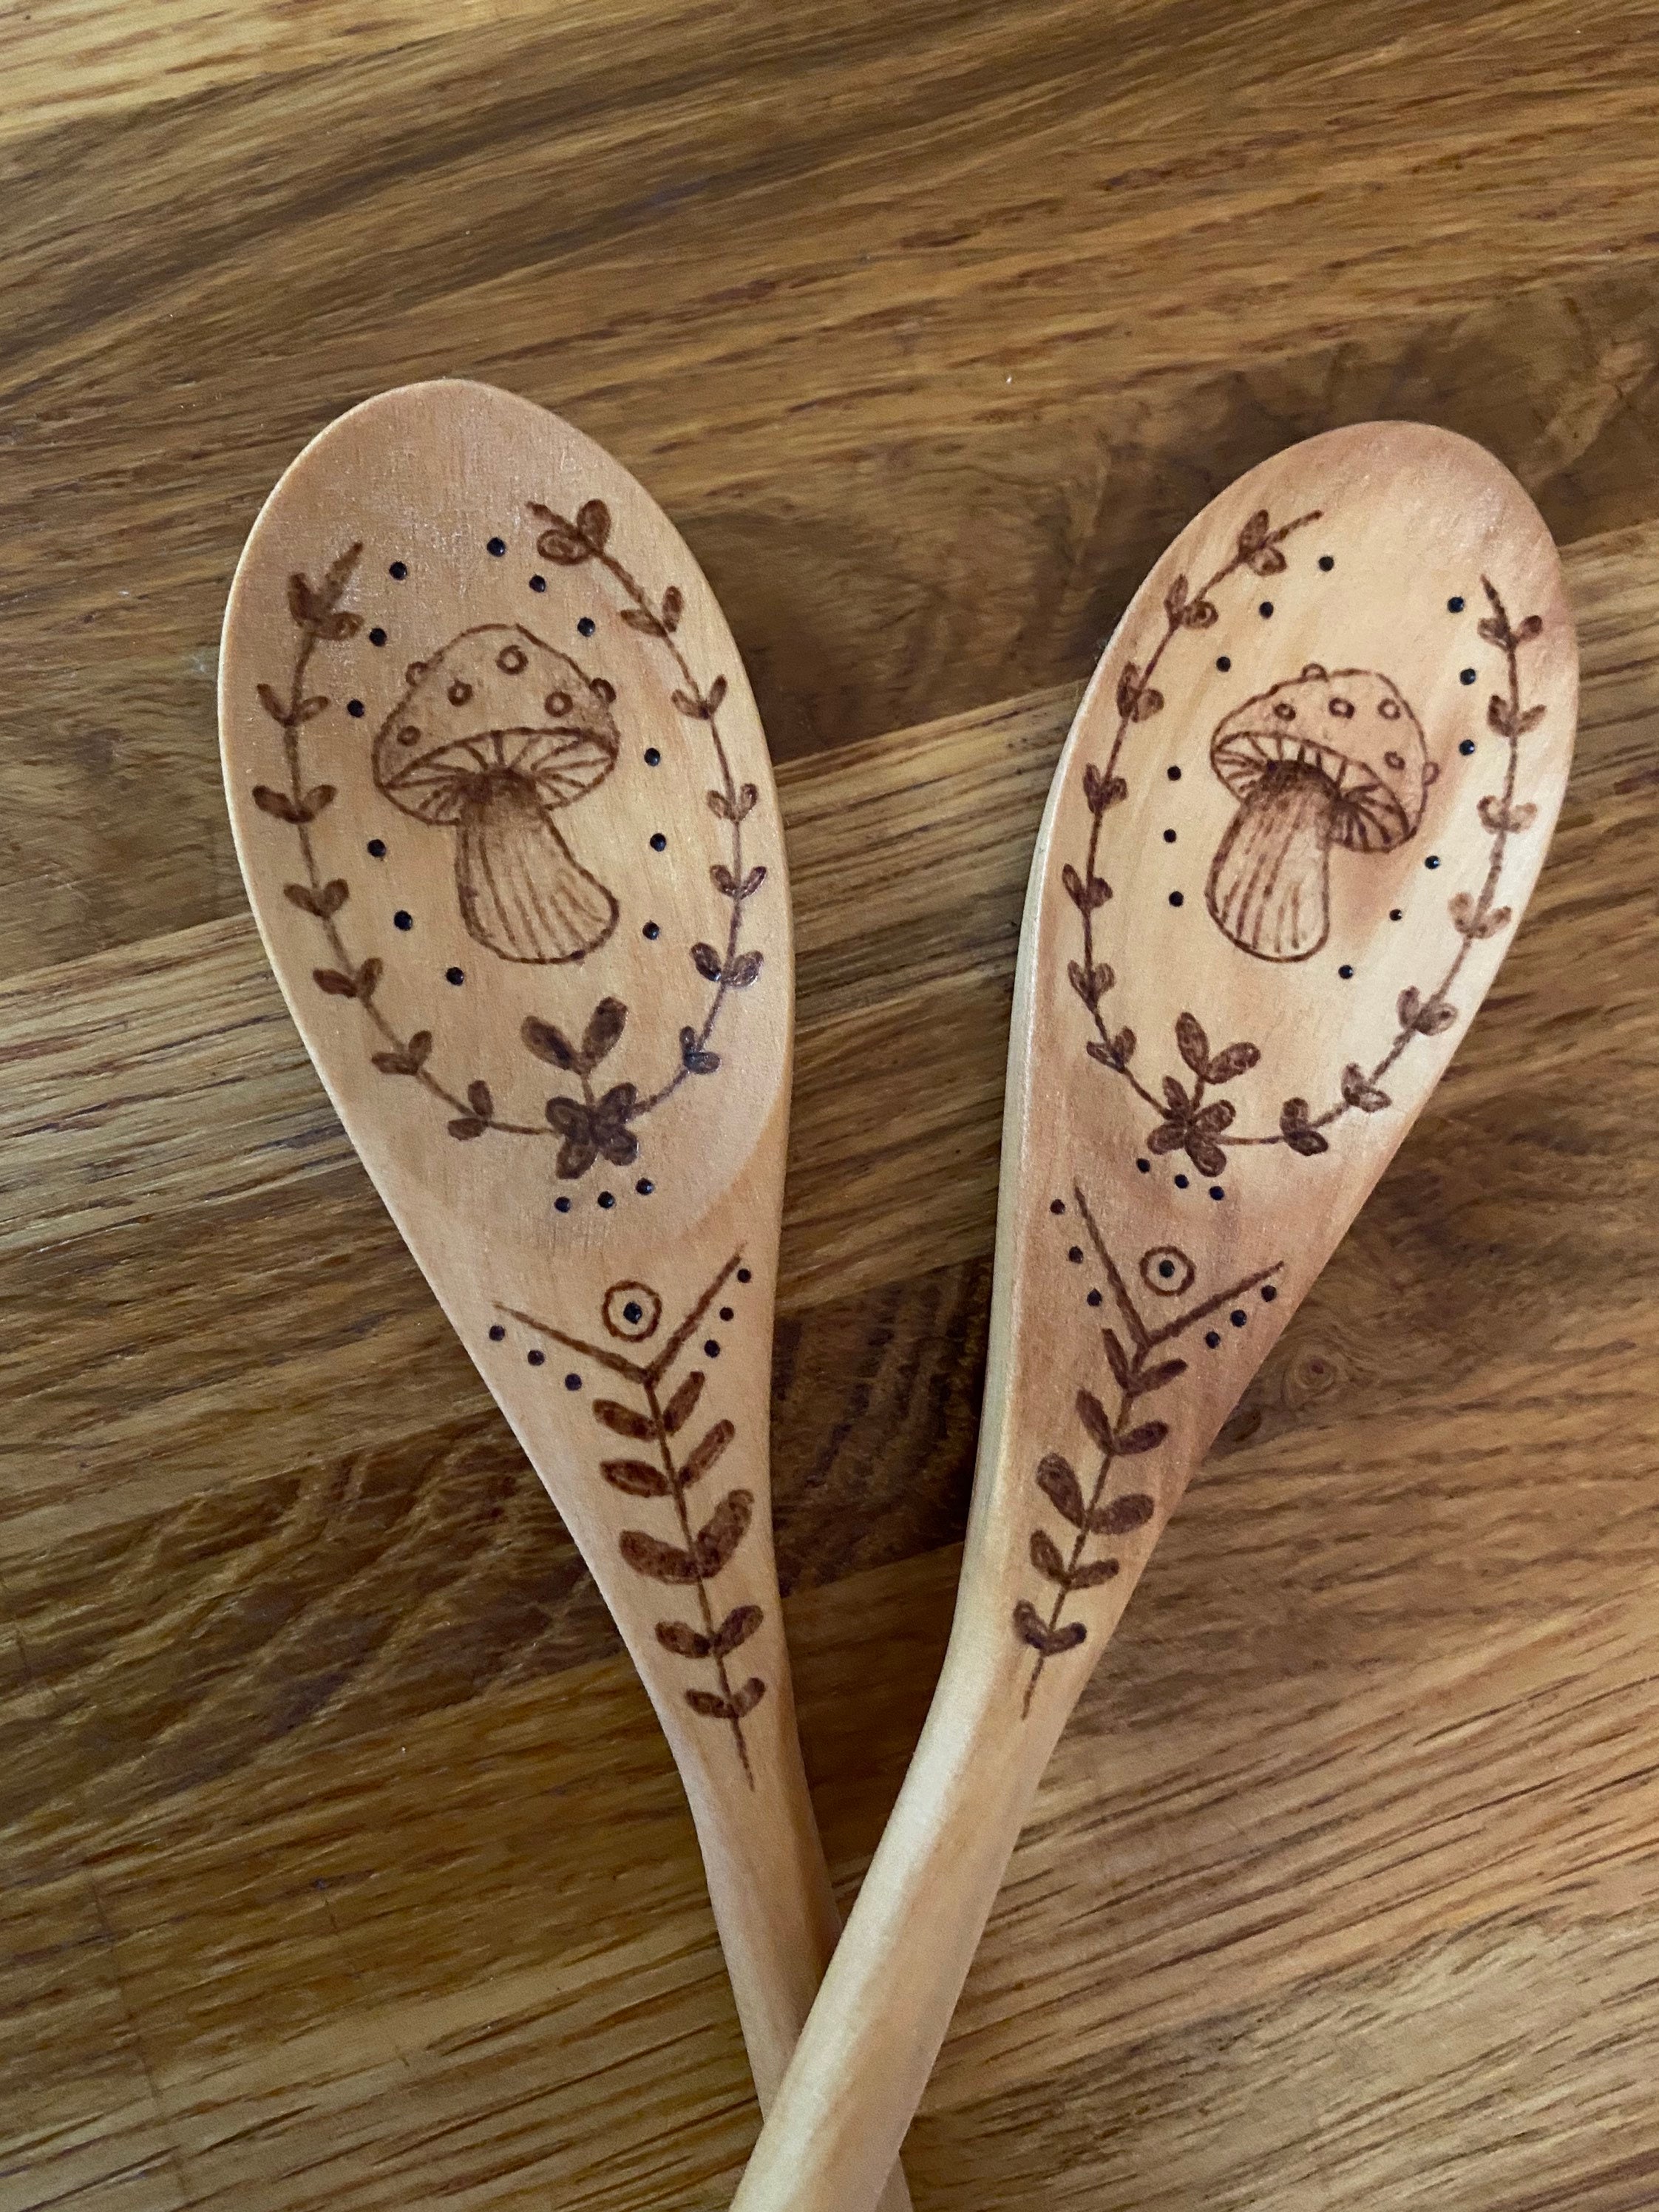  5 PCS Wooden Spoons for Cooking,Witchy Gifts for Women,Wooden  Spatula for Kitchen Witch Decor,Christmas Gifts for Witches,Witch Stuff for  Christmas Kitchen Decor: Home & Kitchen